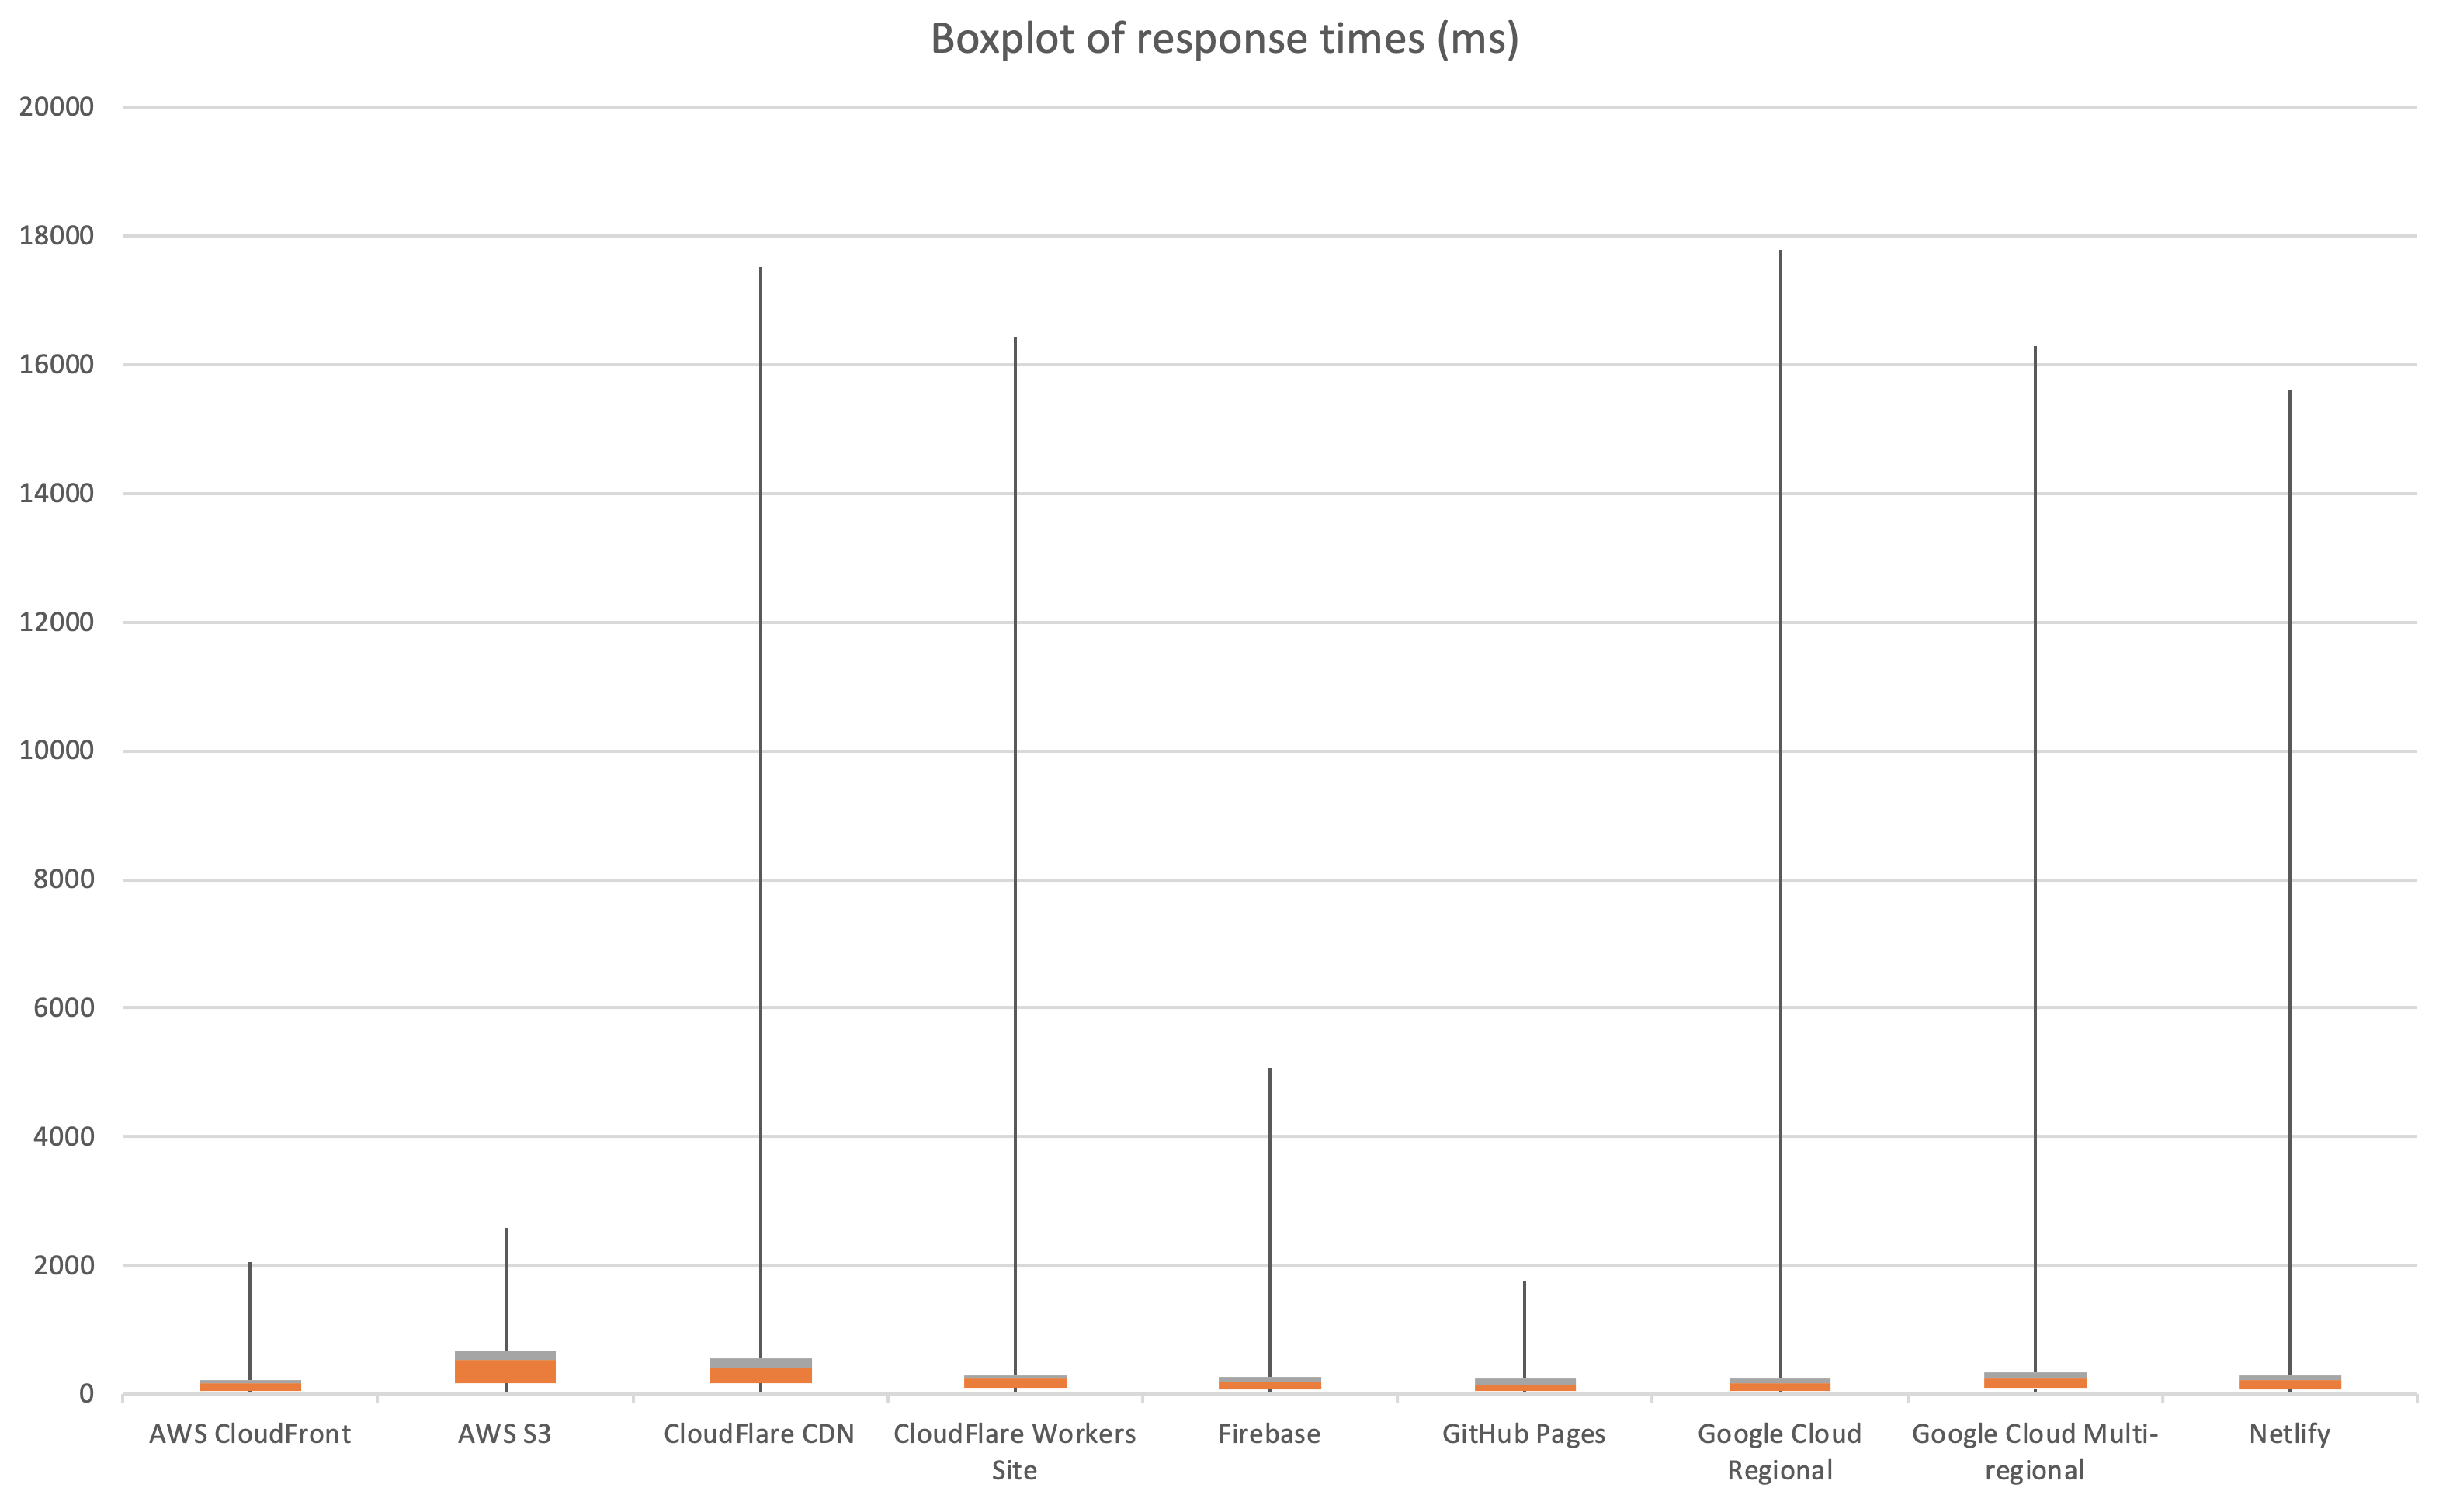 Box plot of response times, showing some high spikes